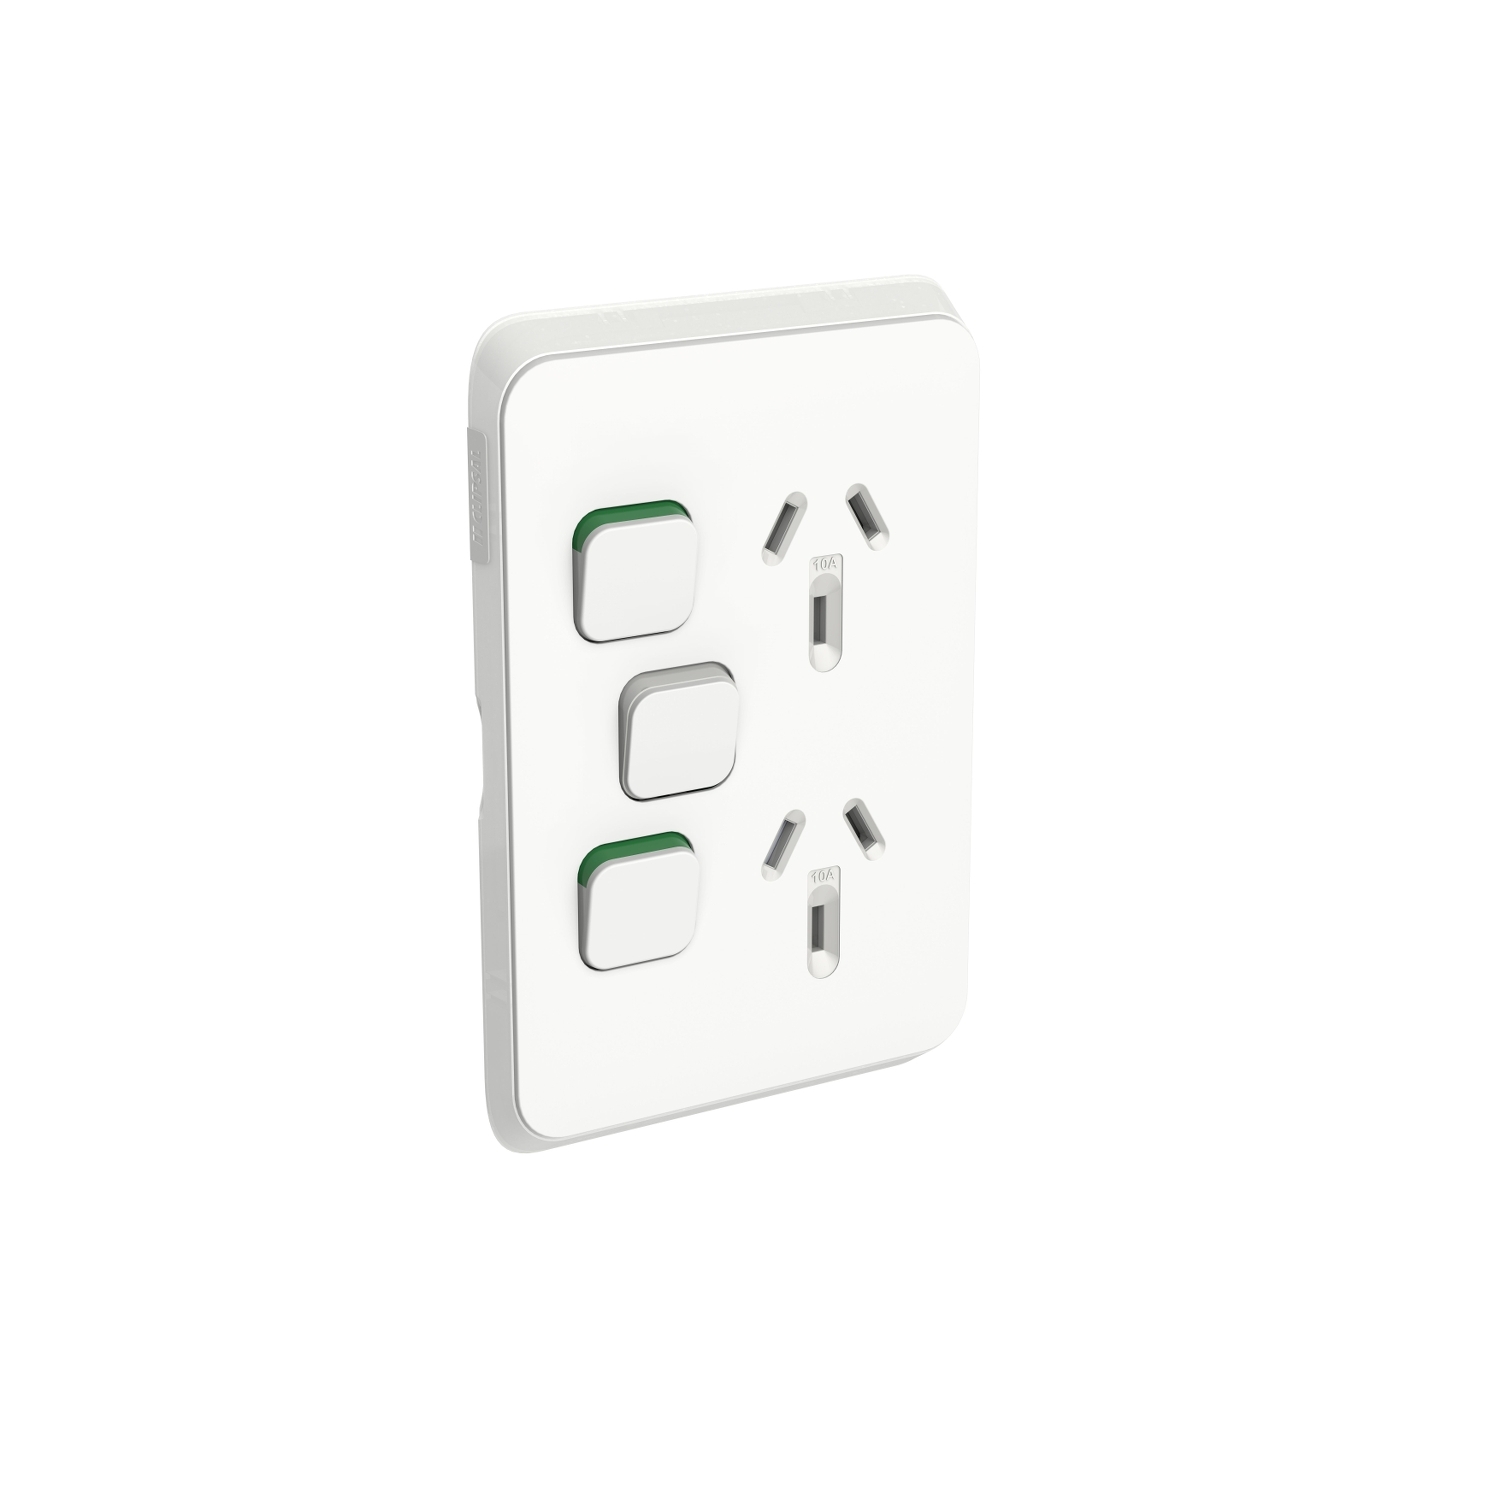 Clipsal Iconic Double Power Point With Extra Switch 10A VERTICAL - Vivid White 3025VXA-VW